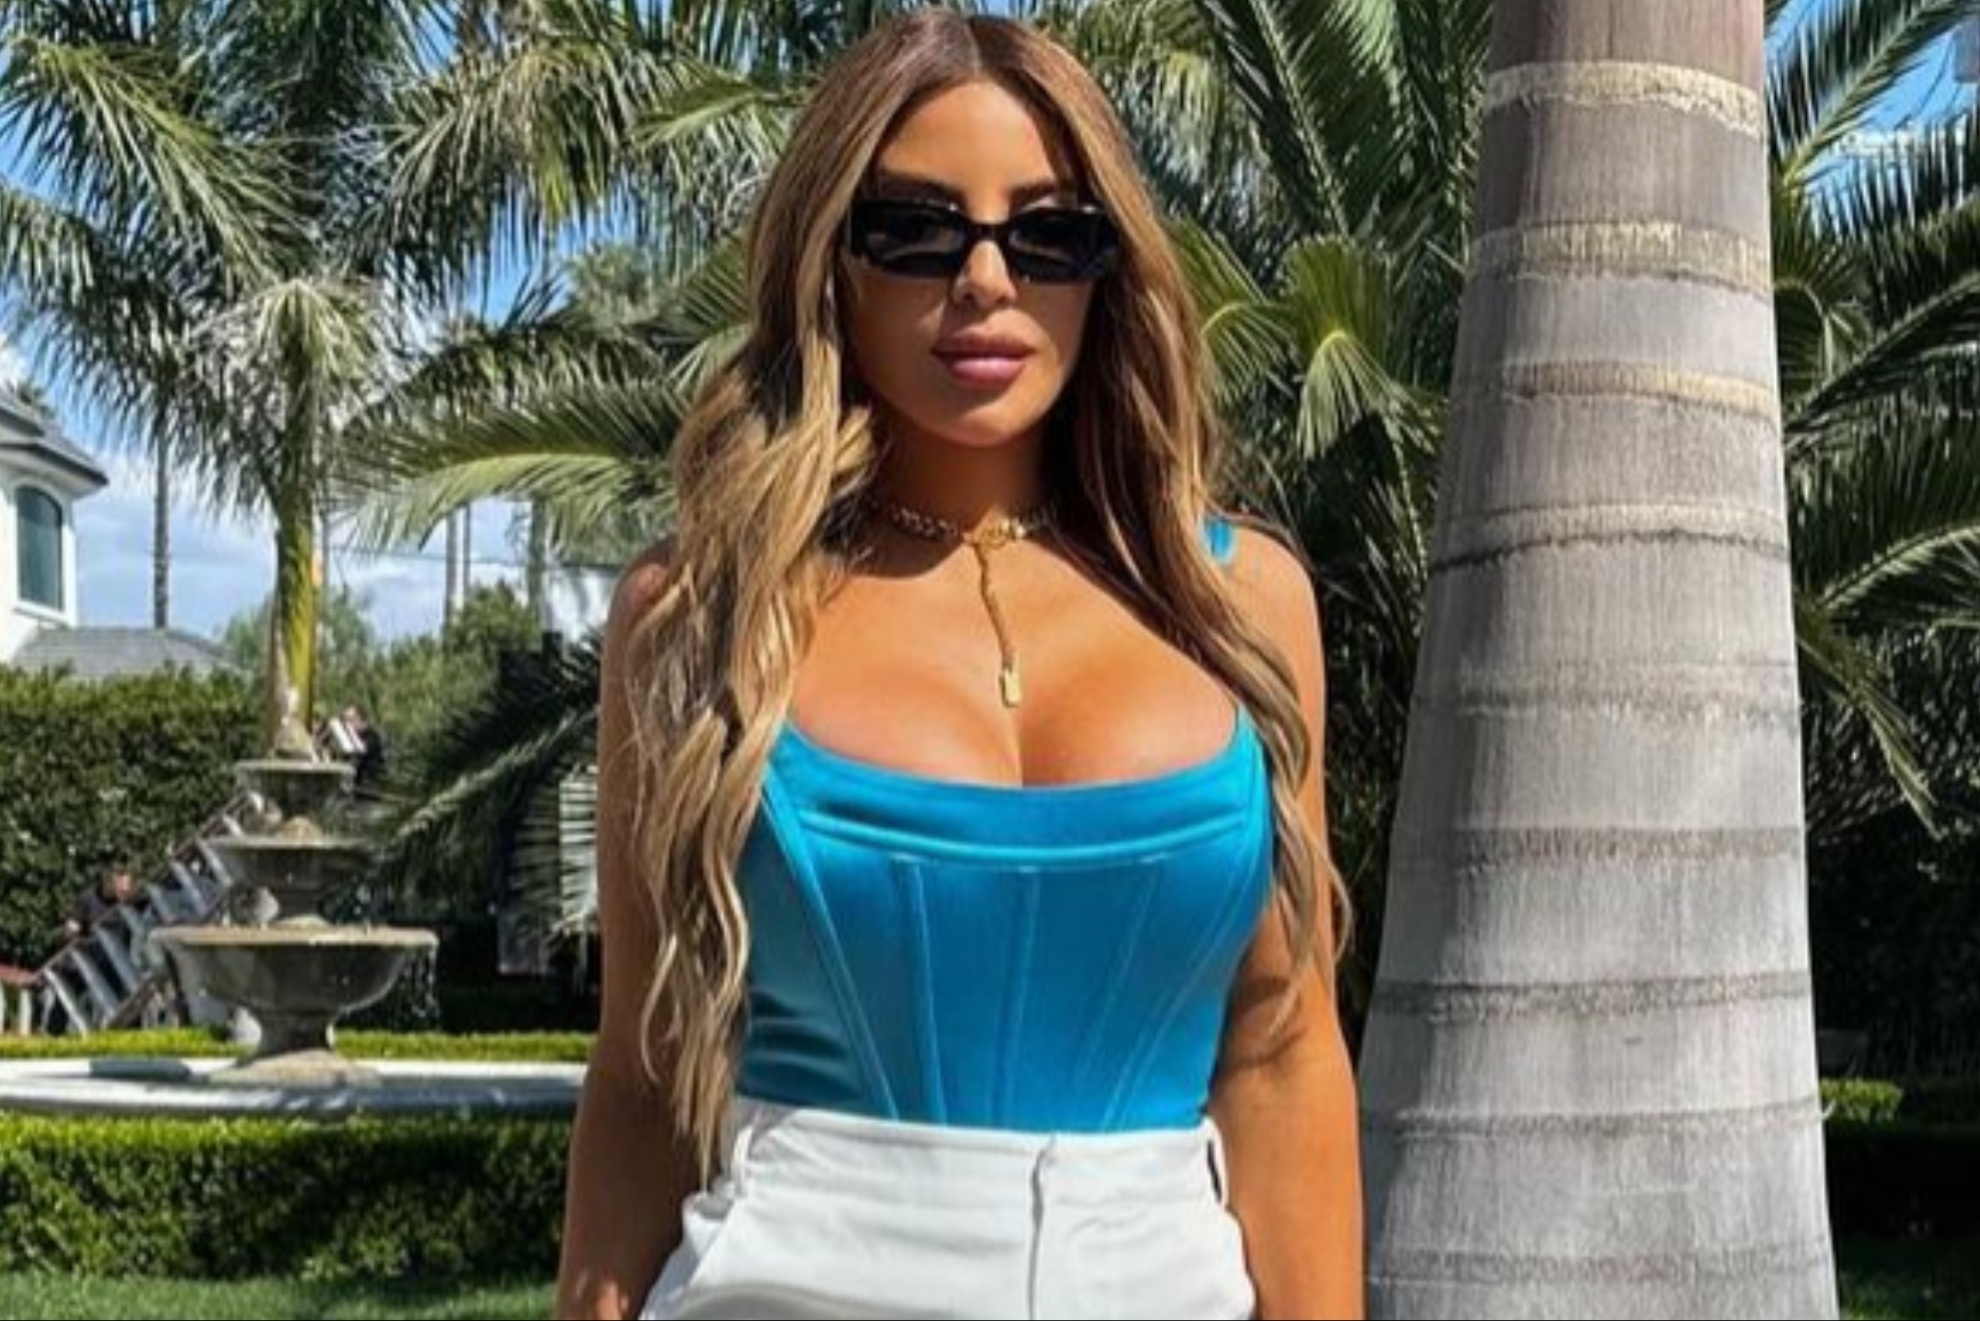 Influencer and Scottie Pippens ex-wife, Larsa Pippen.